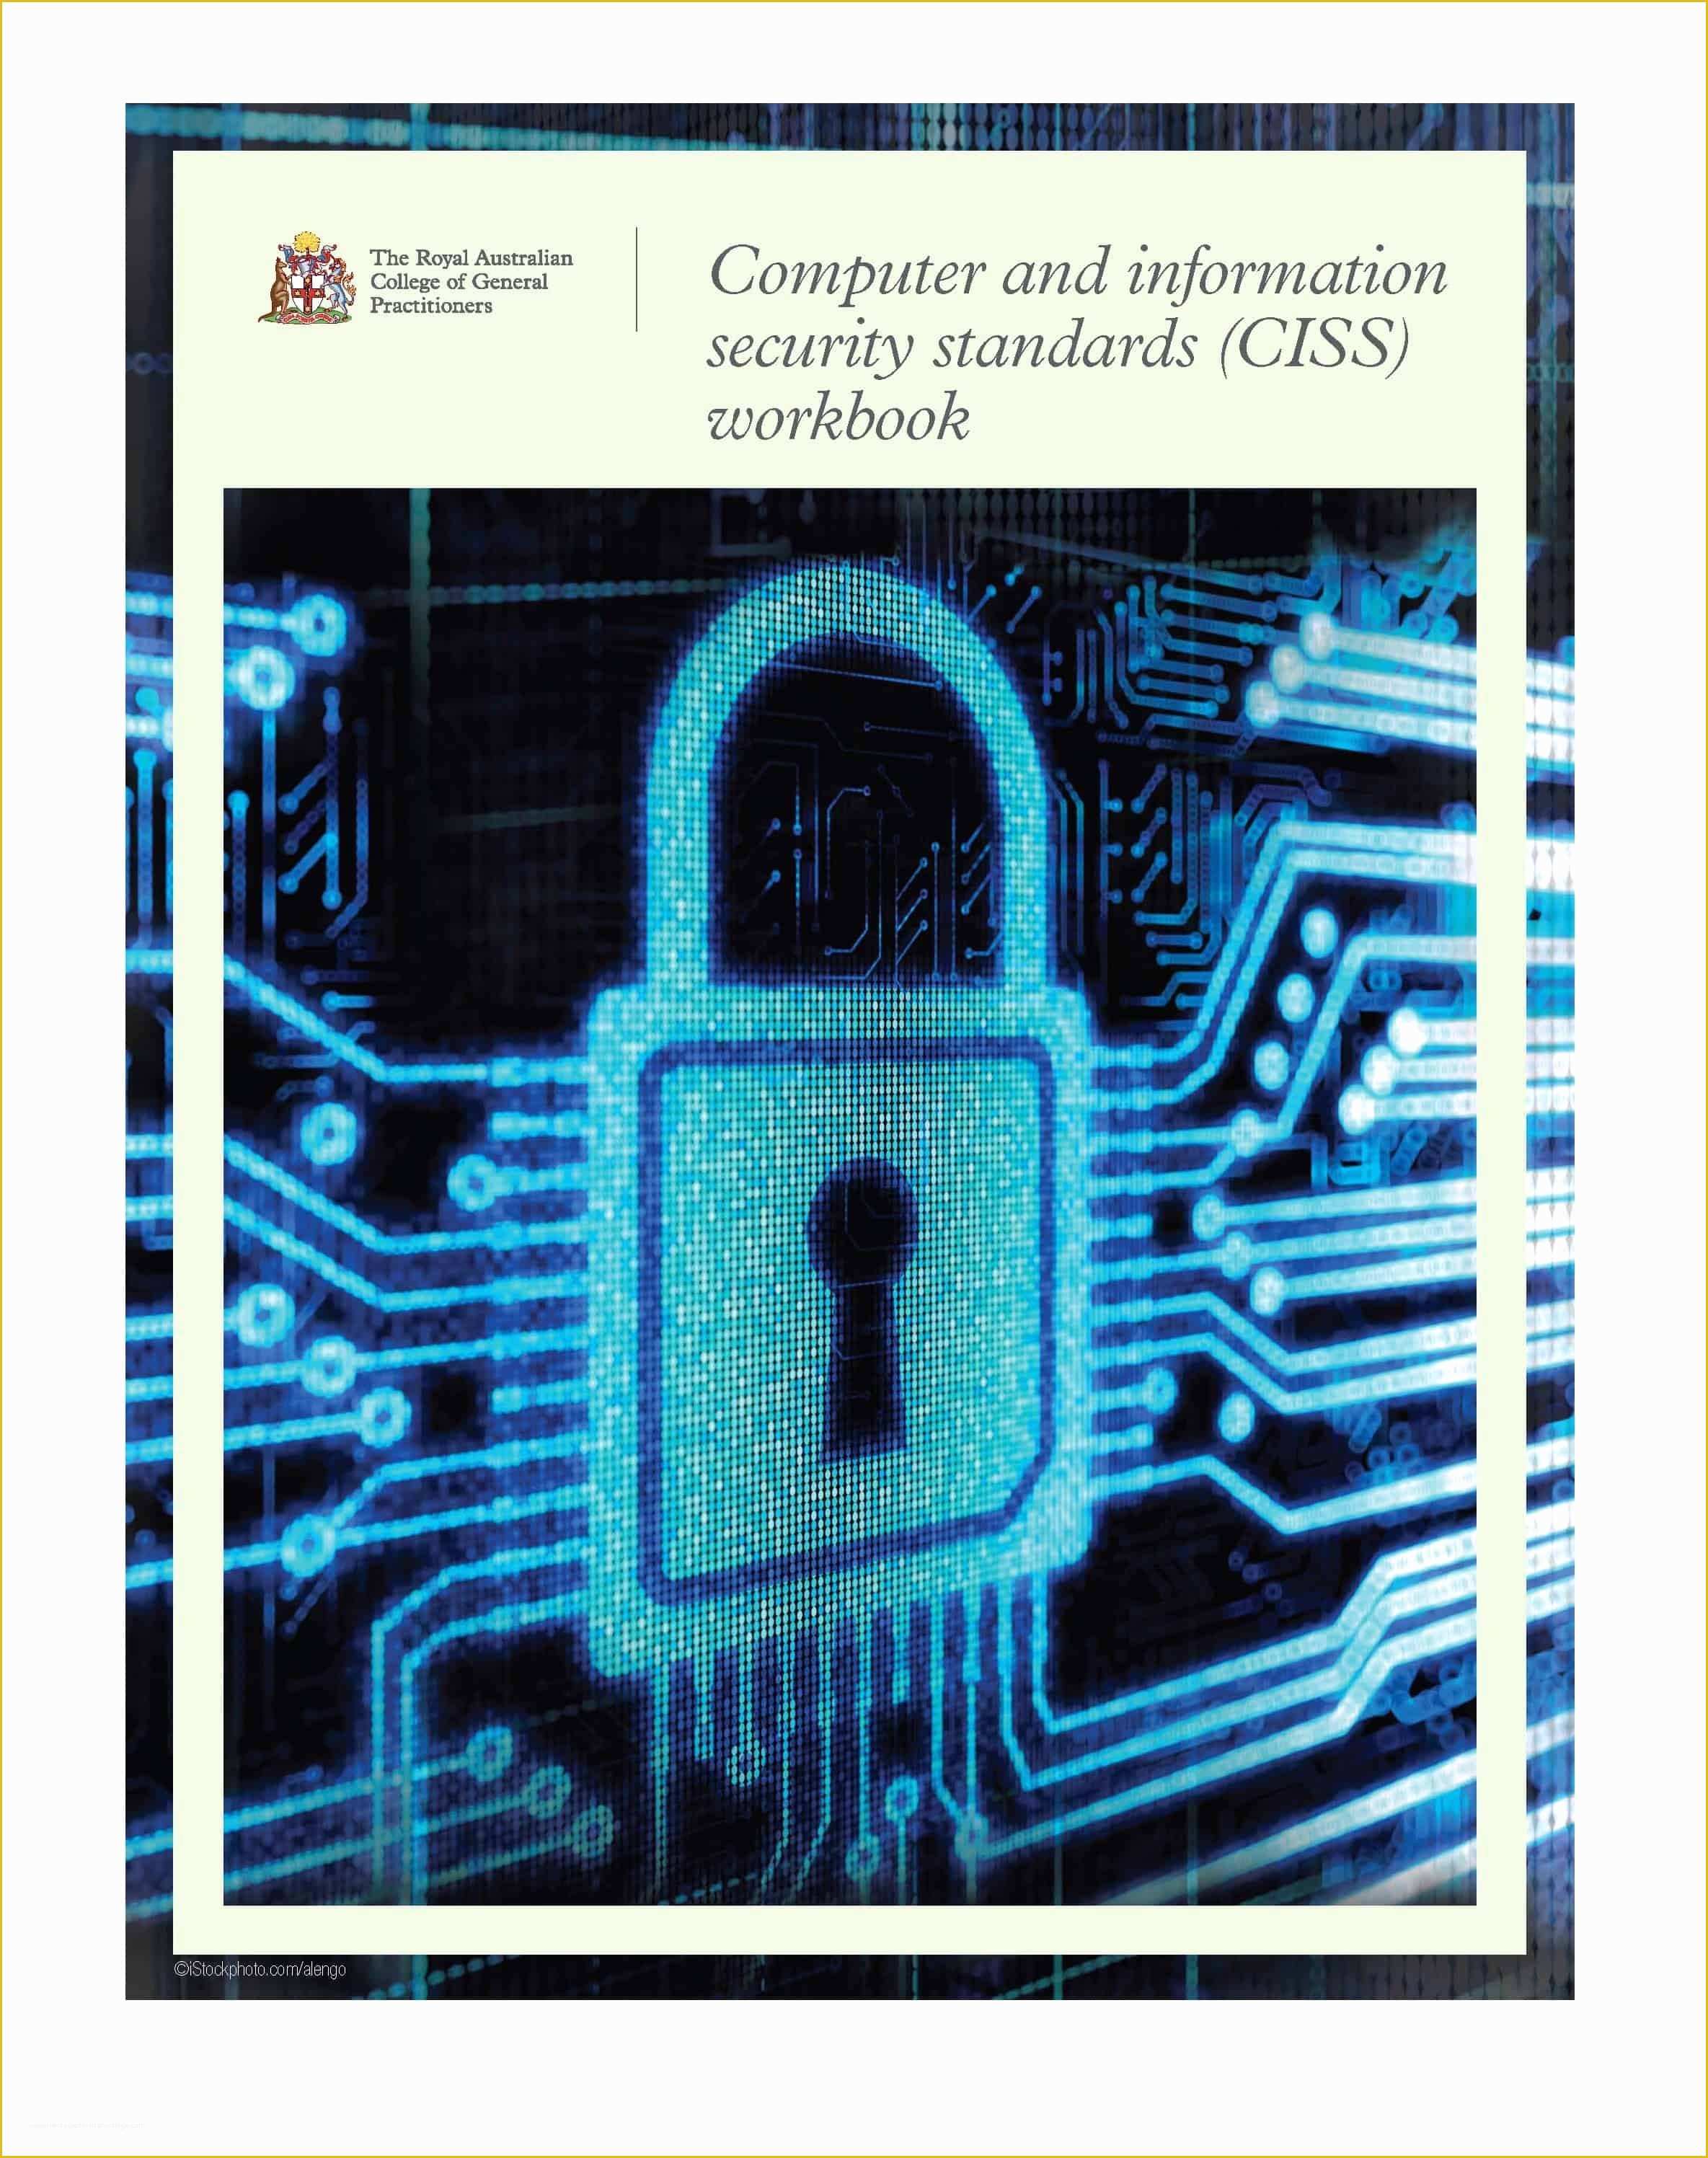 Free Cyber Security Policy Template Of 42 Information Security Policy Templates [cyber Security